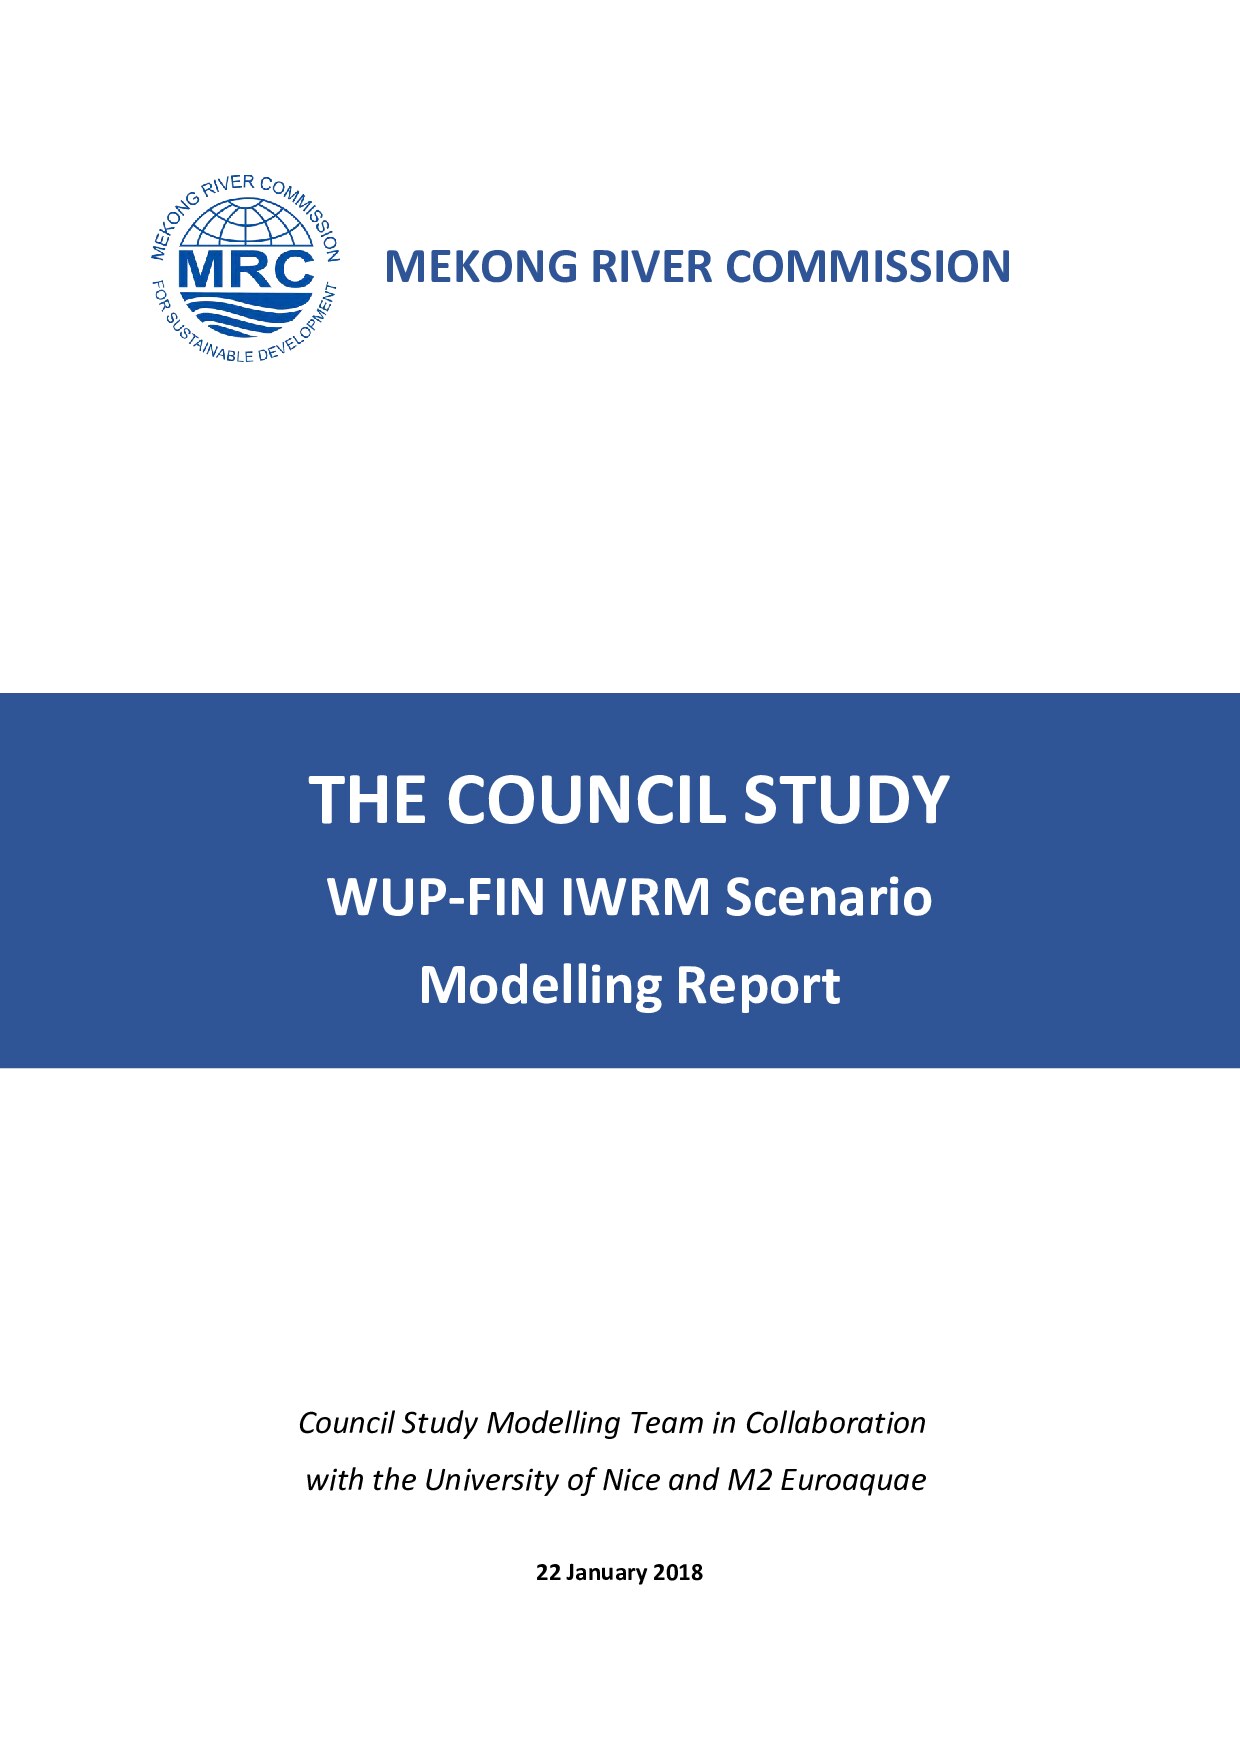 THE COUNCIL STUDY WUP-FIN IWRM Scenario Modelling Report